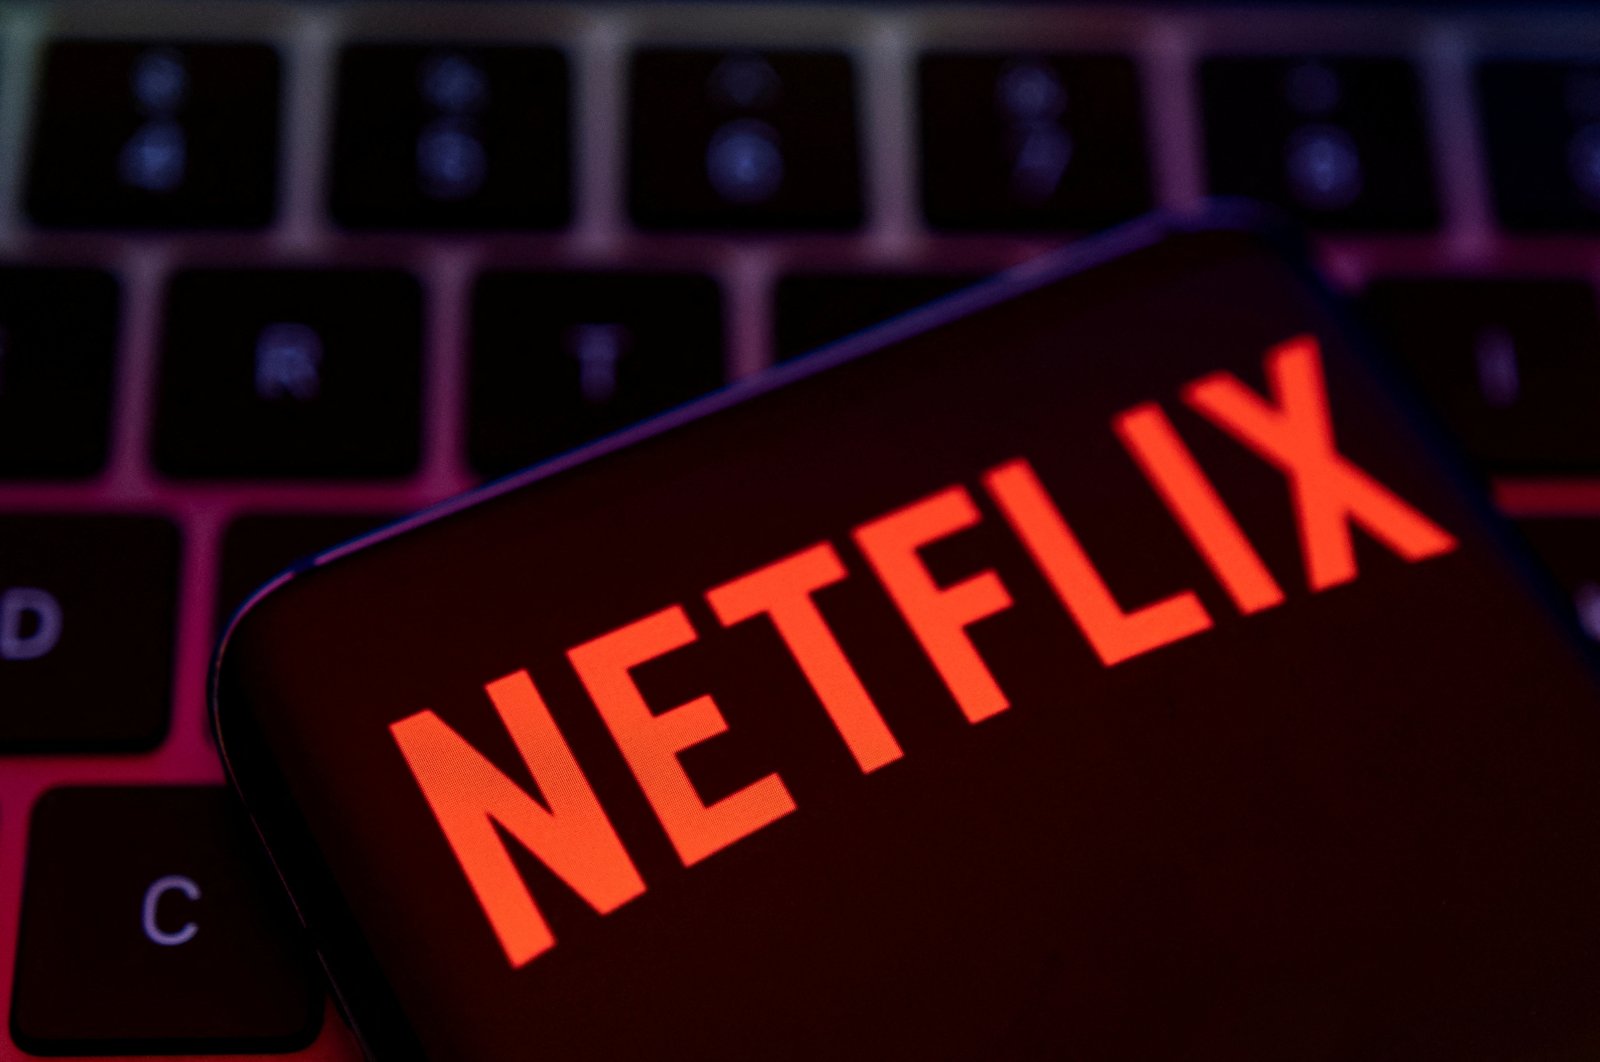 A smartphone with a Netflix logo is placed on a keyboard in this illustration taken on April 19, 2022. (Reuters Photo)